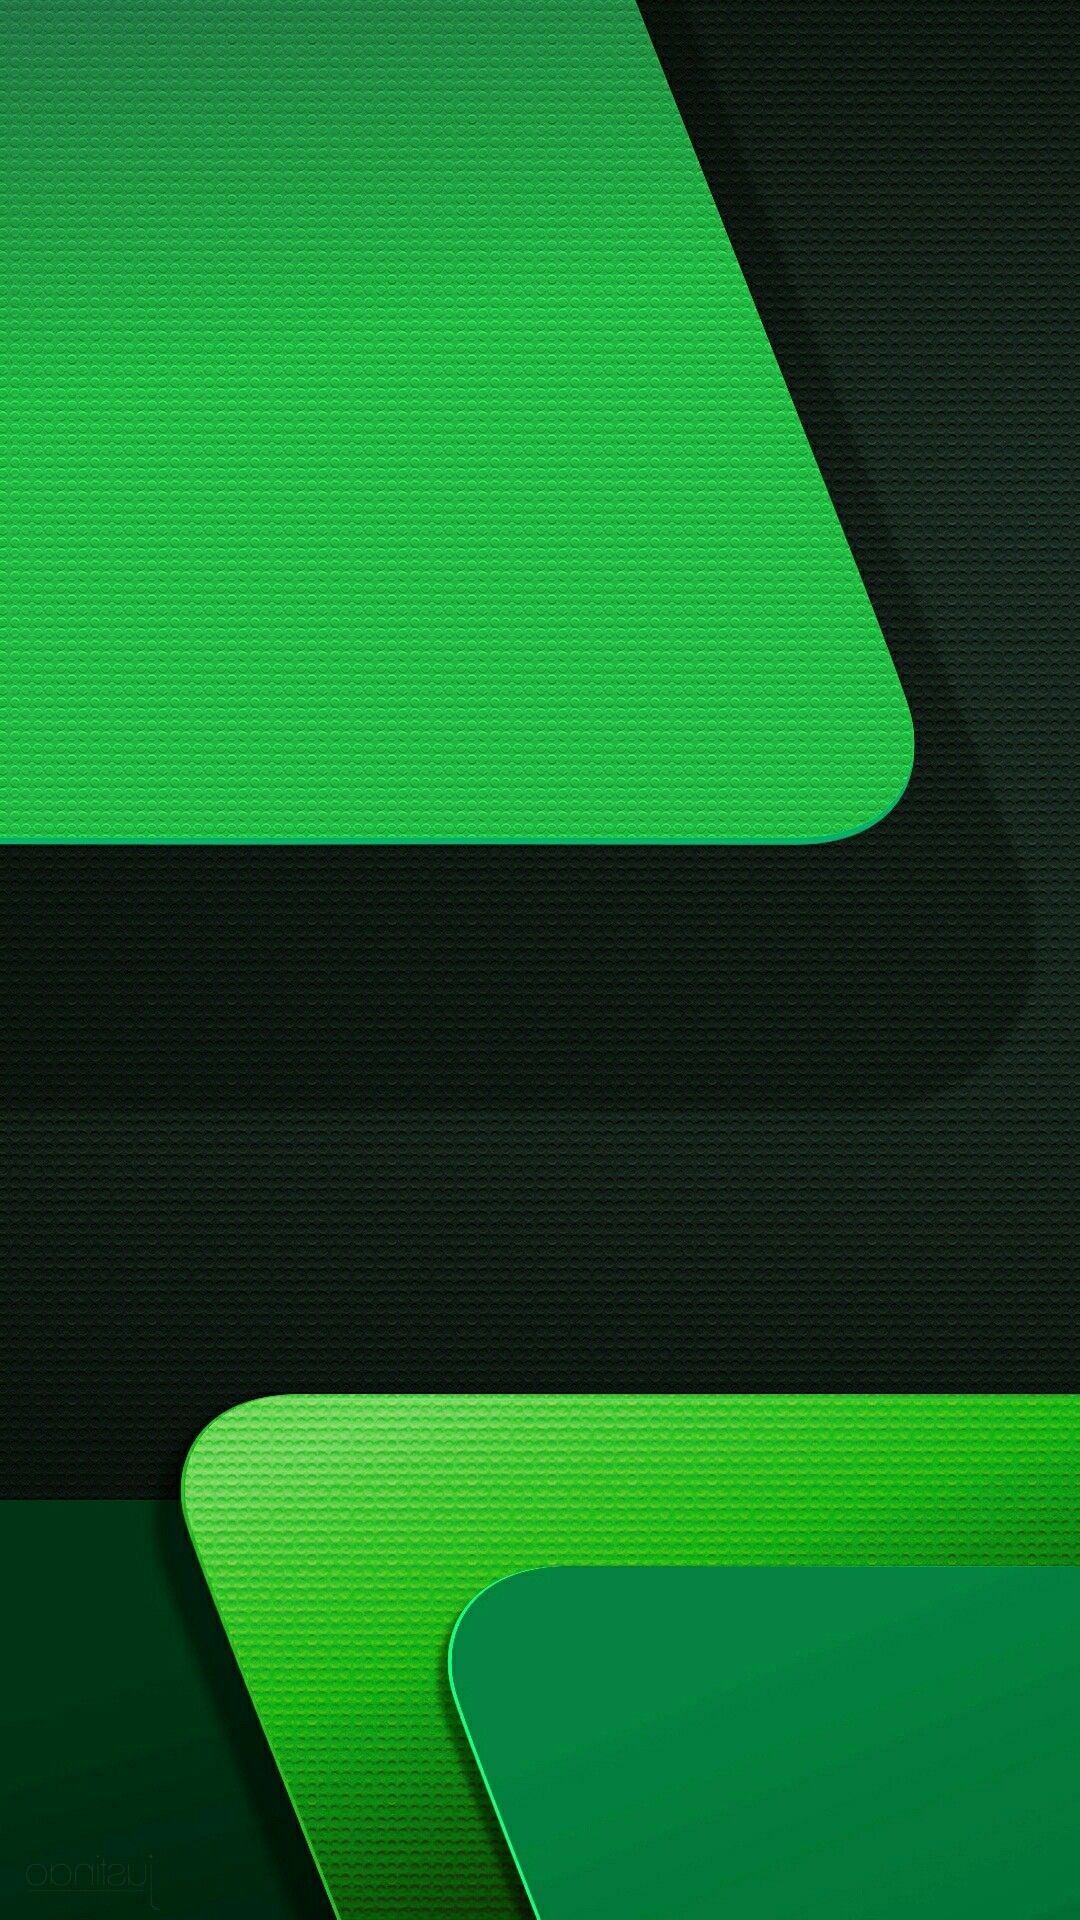 HD 4k Mobile Black And Green Wallpapers - Wallpaper Cave